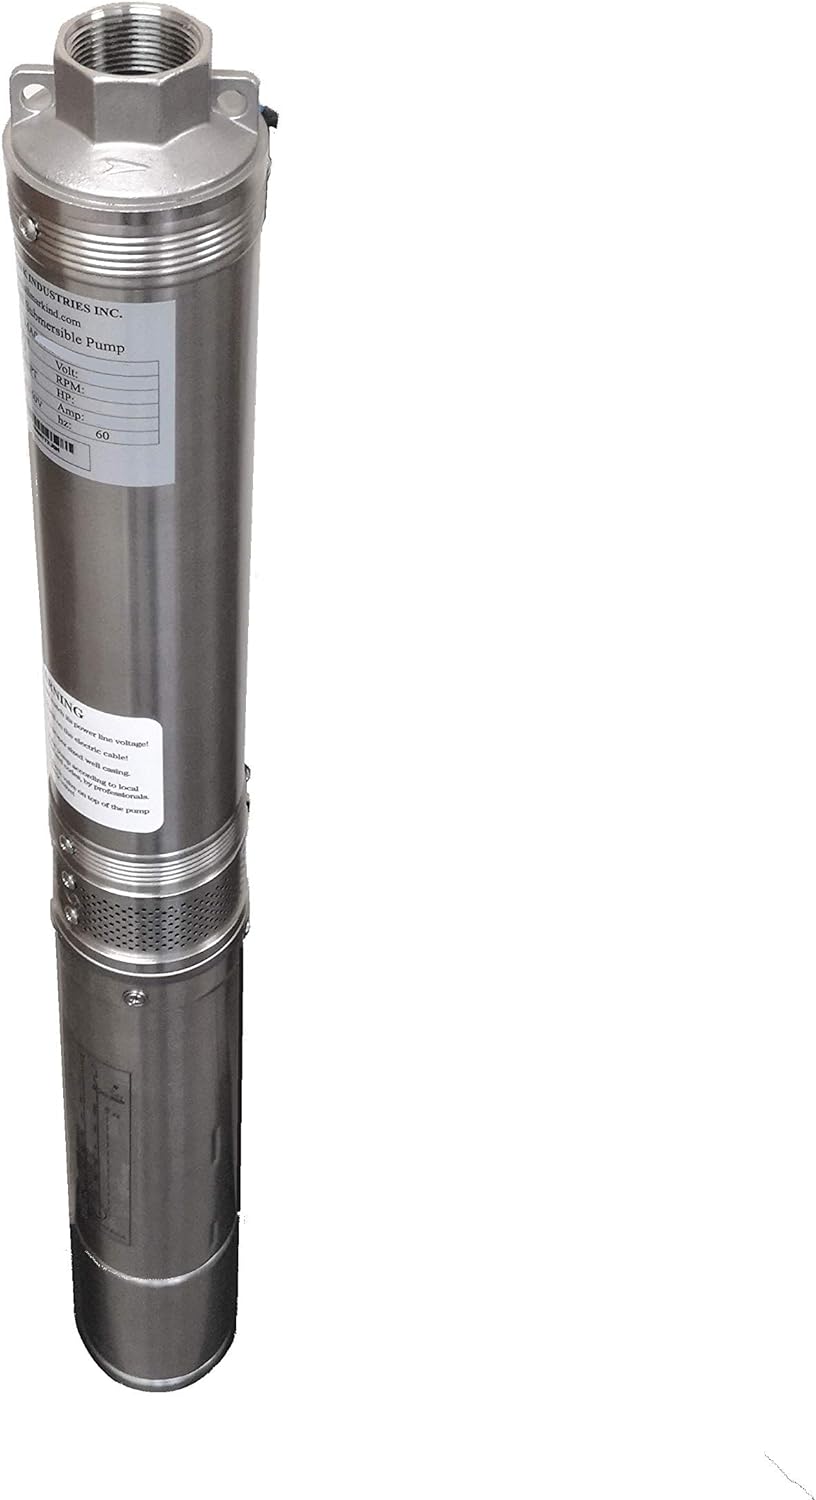 Hallmark Industries MA0414X-7A Deep Well Submersible Pump, 1 hp, 230V, 60 Hz, 30 GPM, 207 Head, Stainless Steel, 4